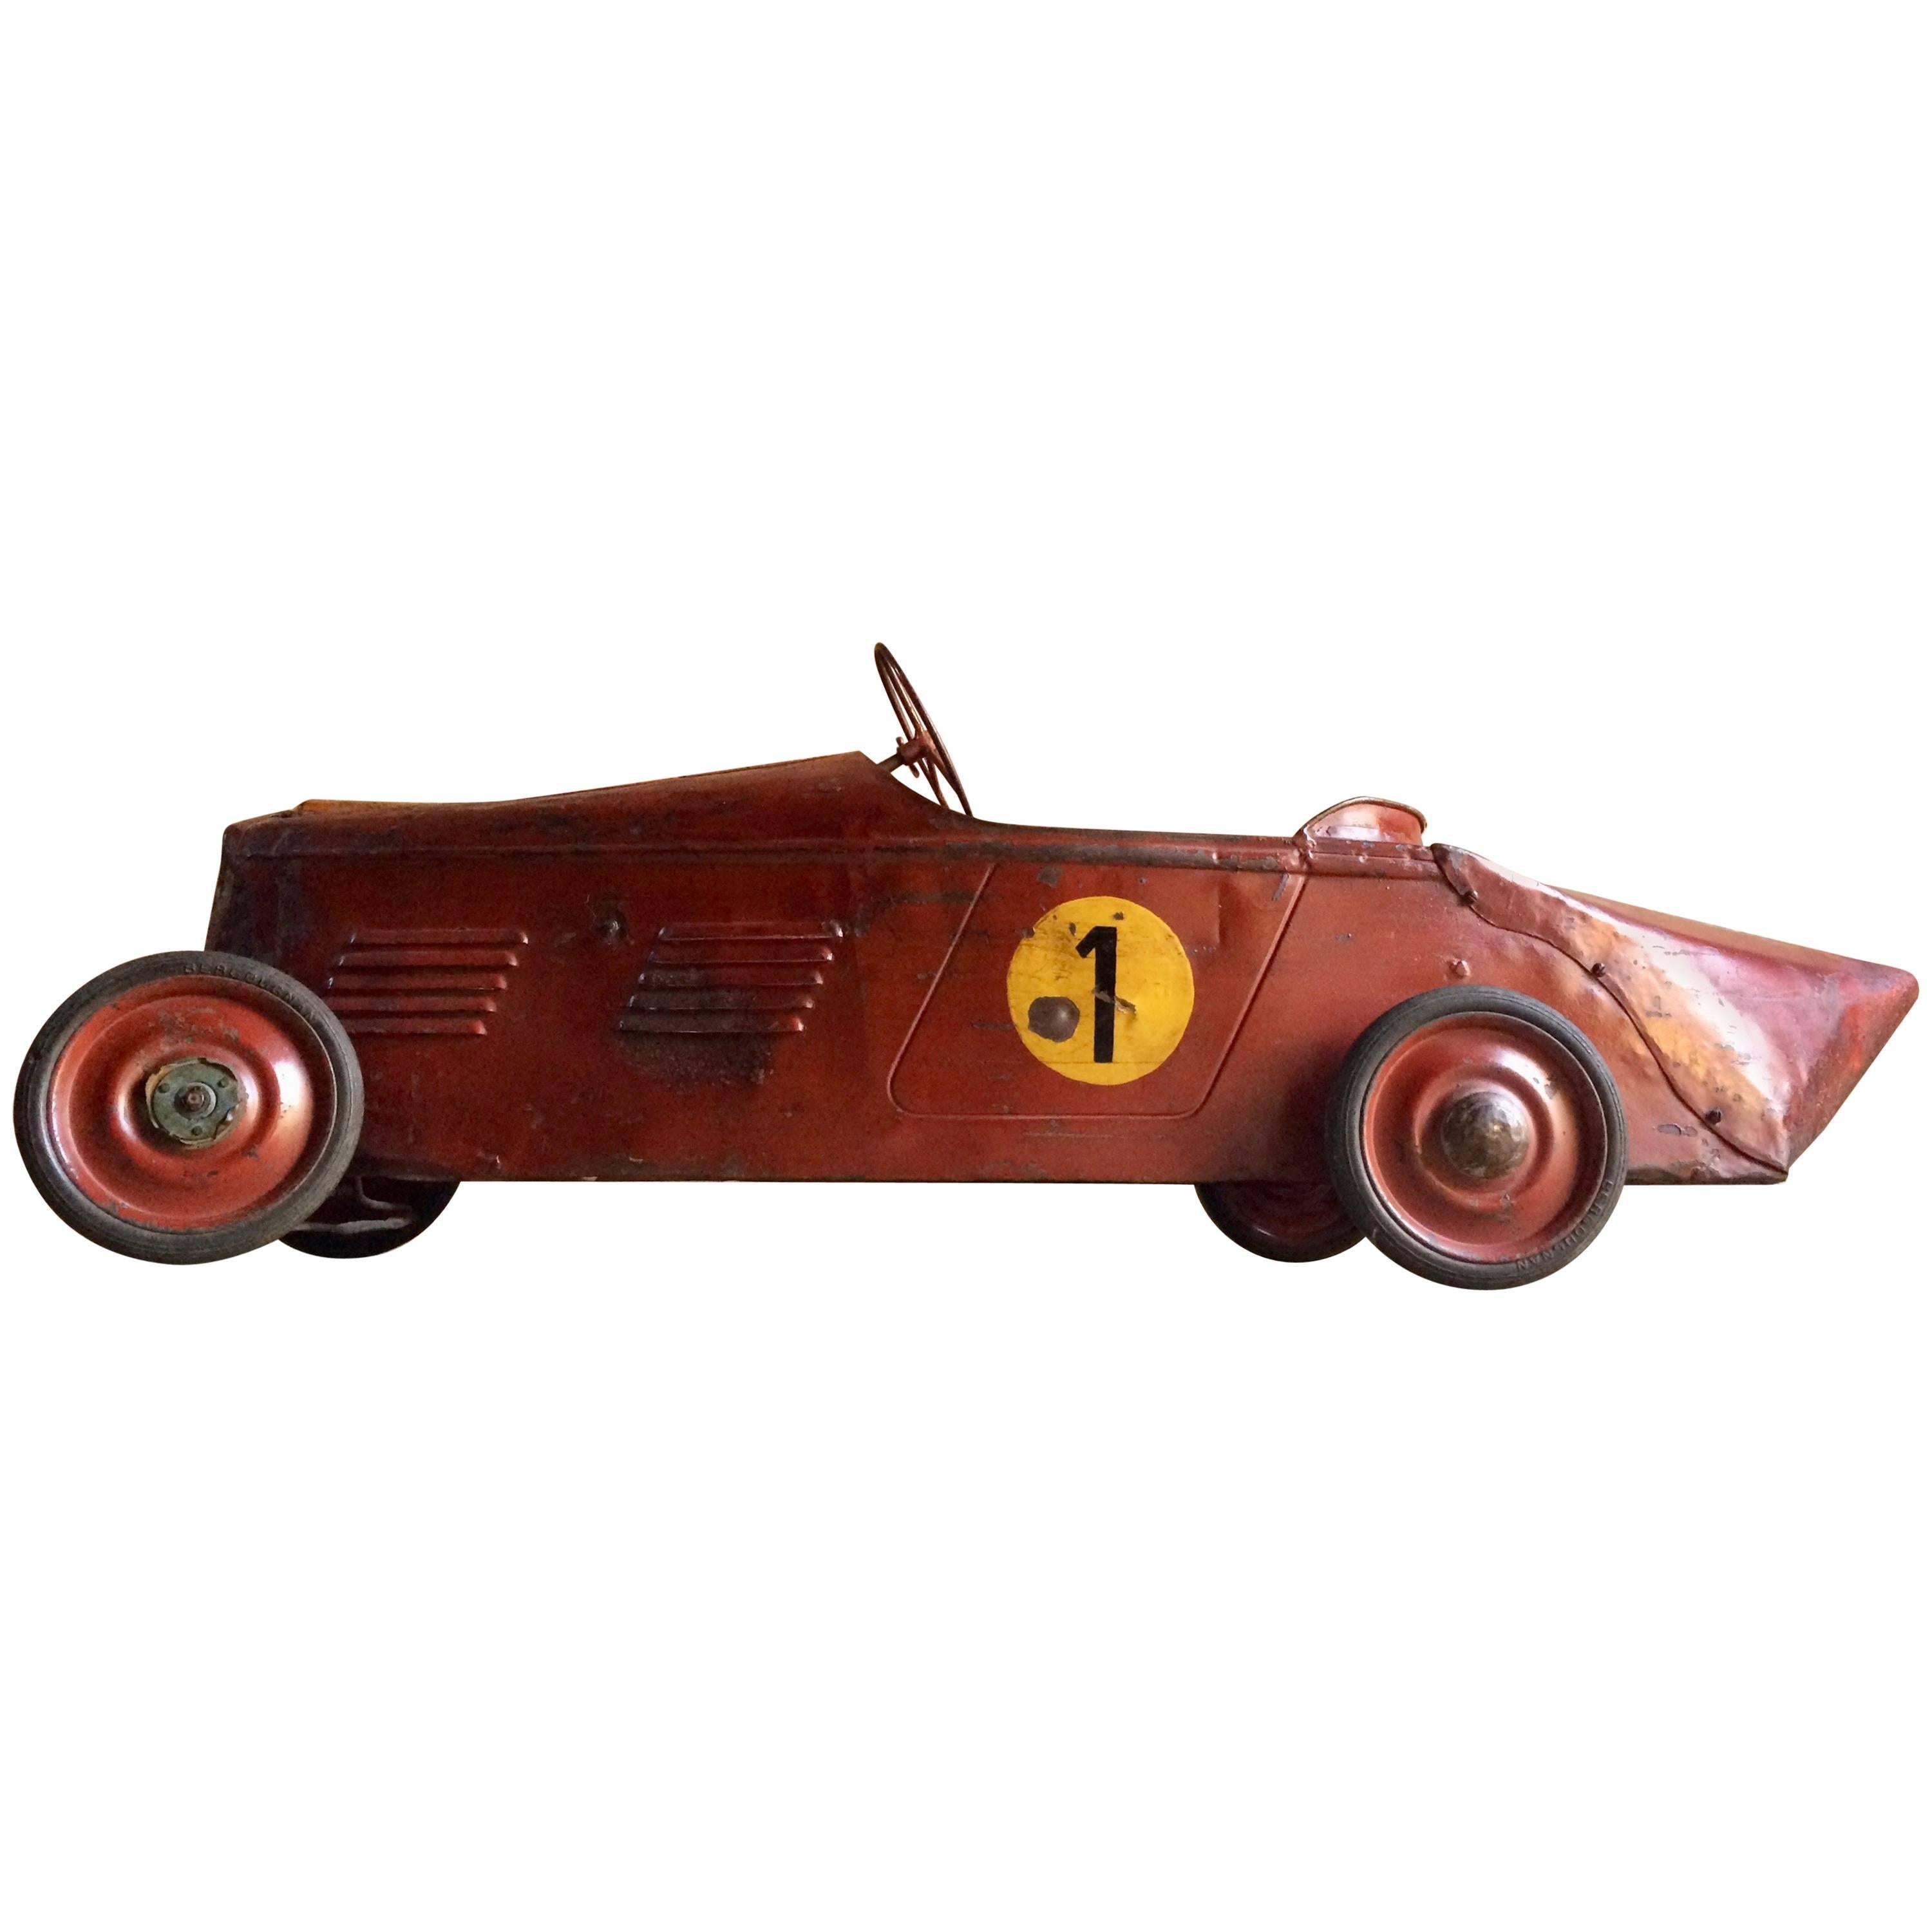 Stunning Vintage Delage Boat Tail Racer Pedal Car Distressed Loft Style, 1935